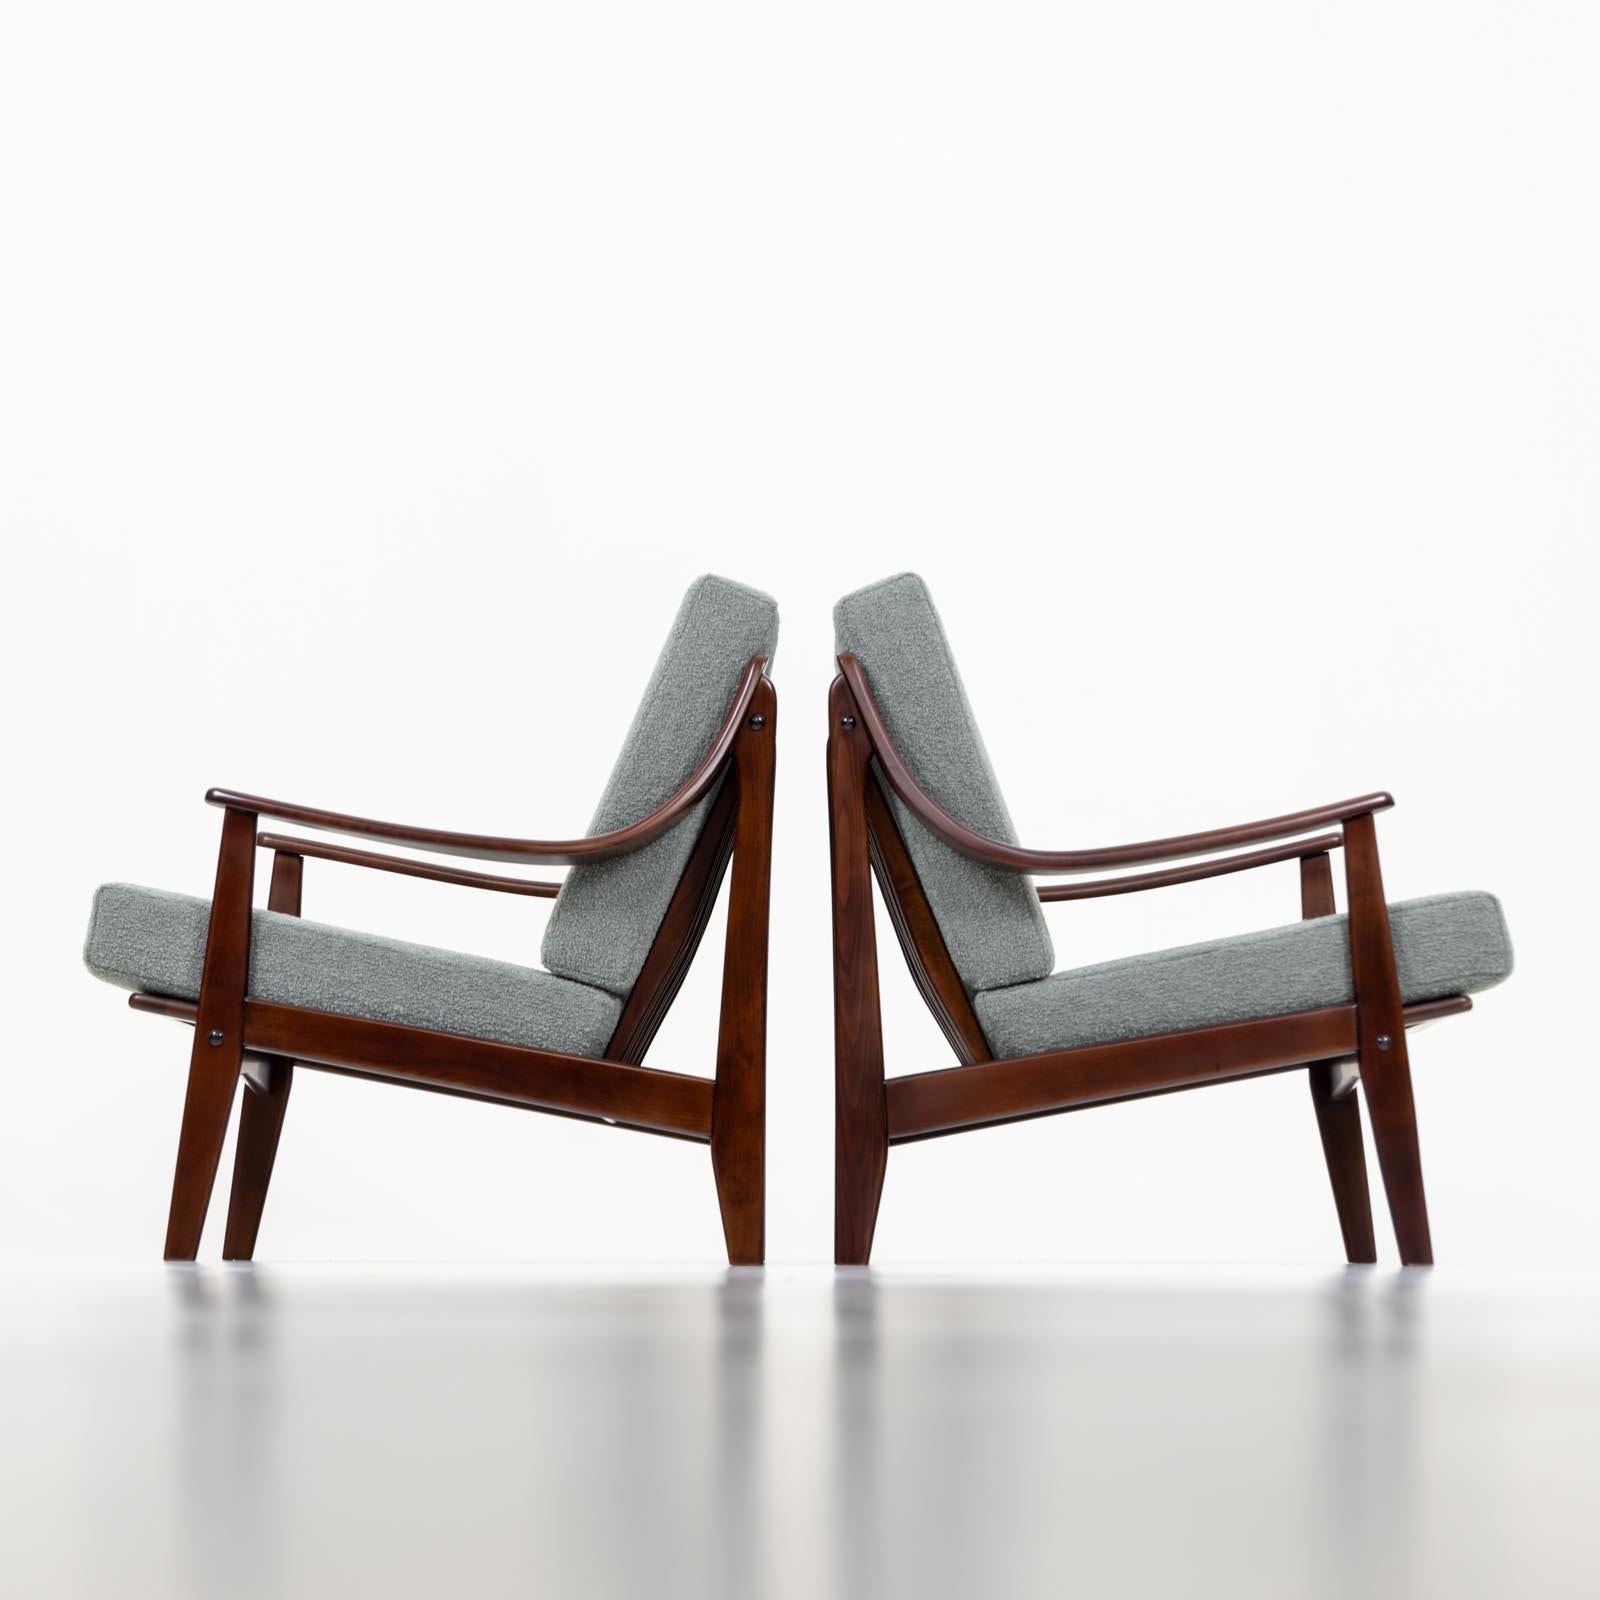 Polished Pair of Danish Lounge Chairs, 1960s For Sale